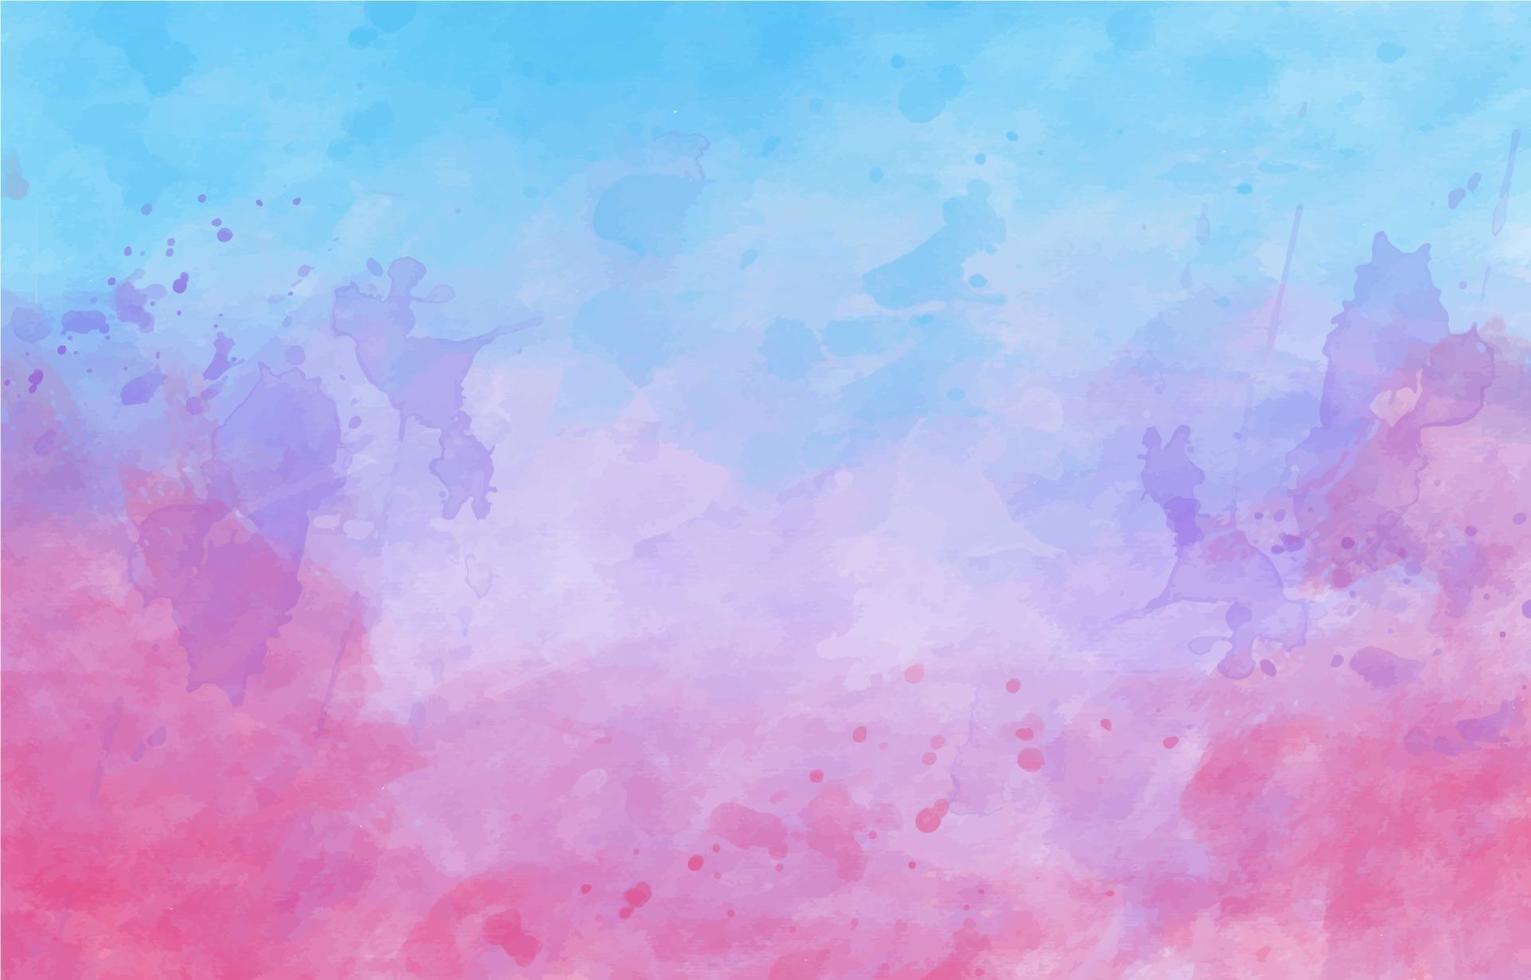 Abstract Watercolor Texture Wallpaper Background vector